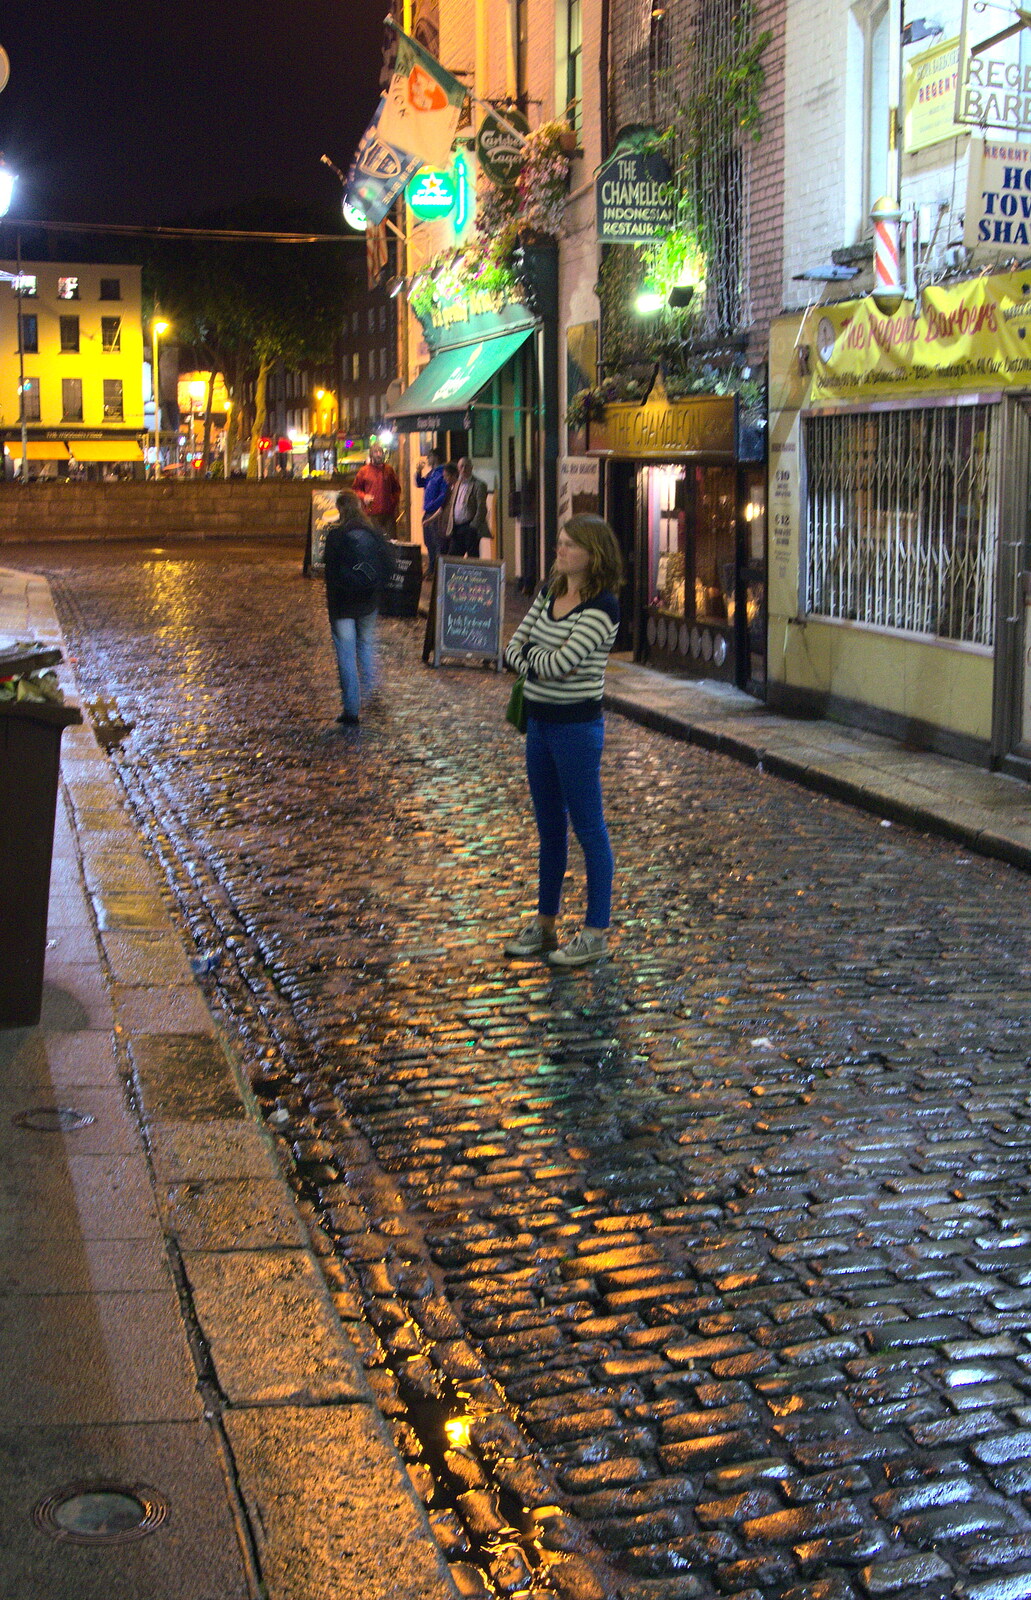 Isobel stands on wet cobbles on Regent Street from A Night Out in Dublin, County Dublin, Ireland - 9th August 2014